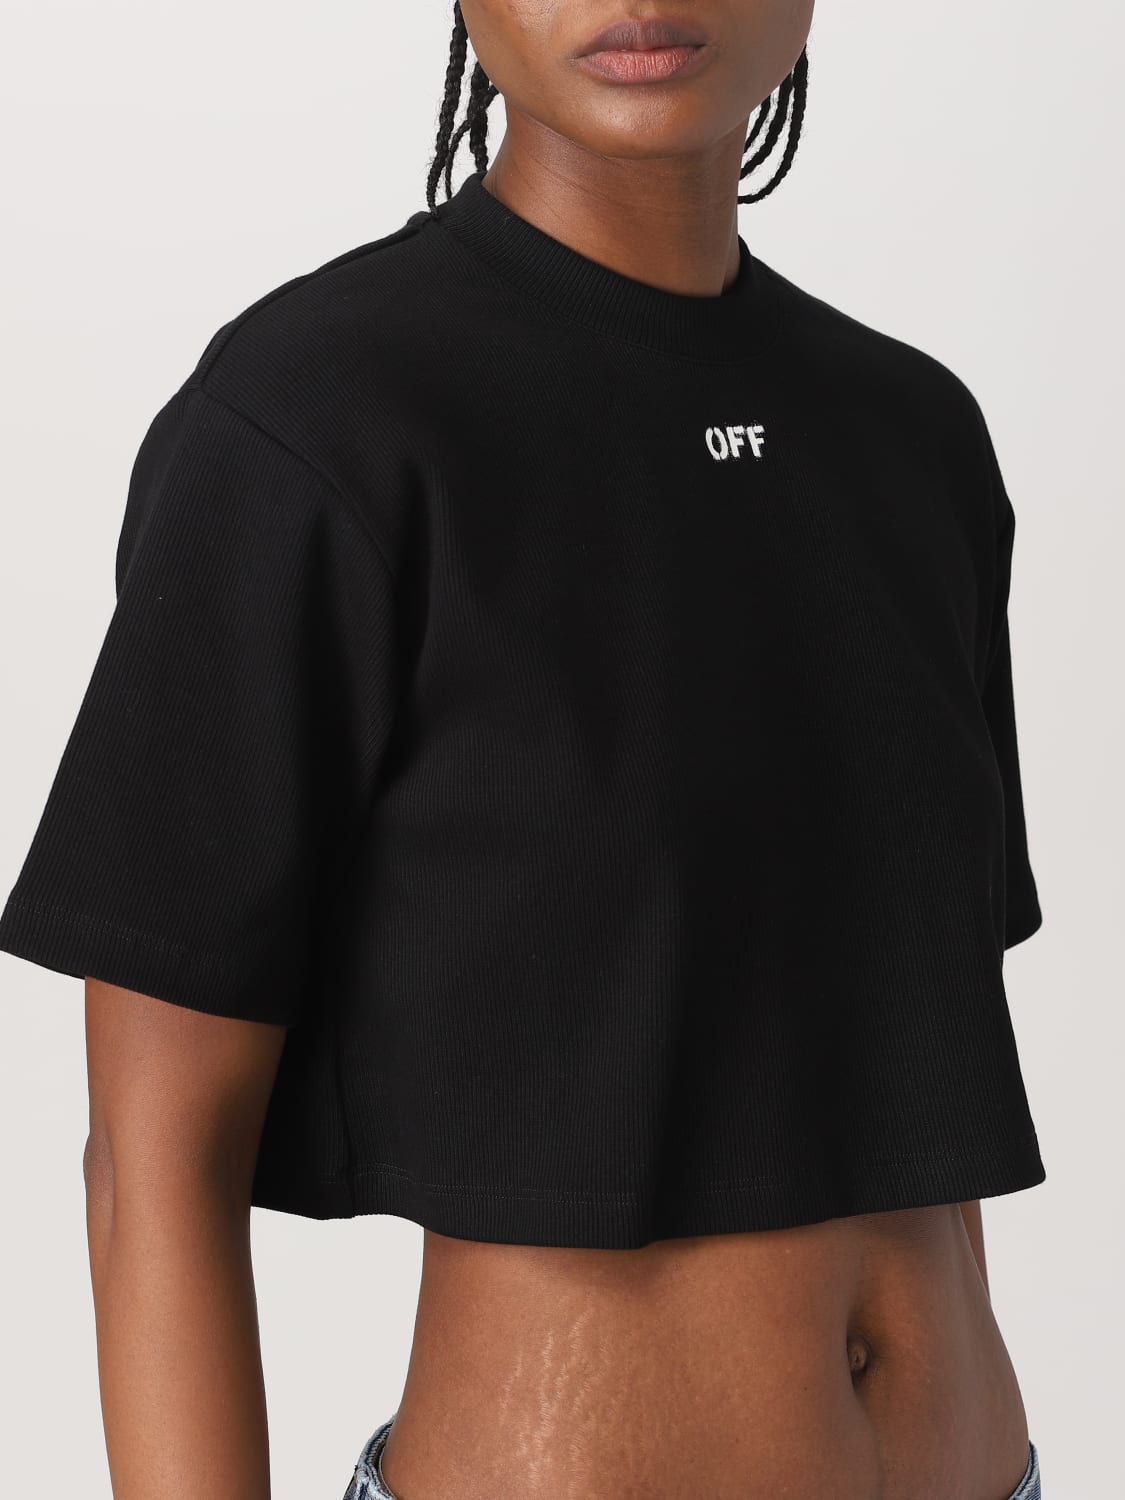 OFF-WHITE: t-shirt for woman - Black | Off-White t-shirt ...